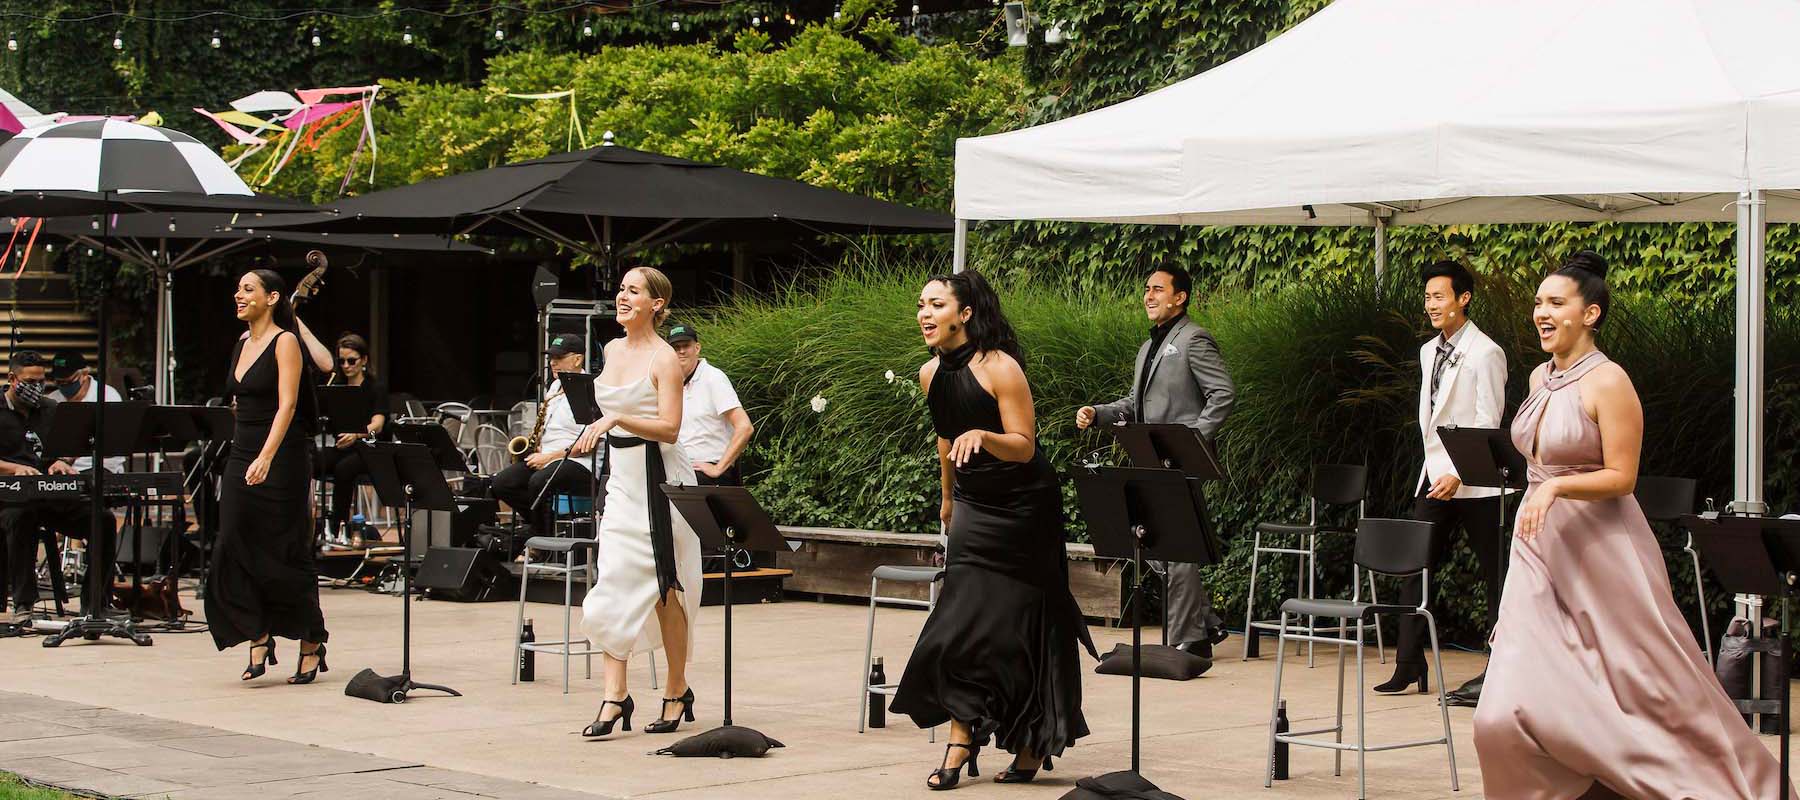 The cast of The Duke and Two Irenes during a Shaw Festival performance at the Courtyard Patio on the Festival Theatre grounds in Niagara-on-the-Lake. (Photo: Jason Lupish)